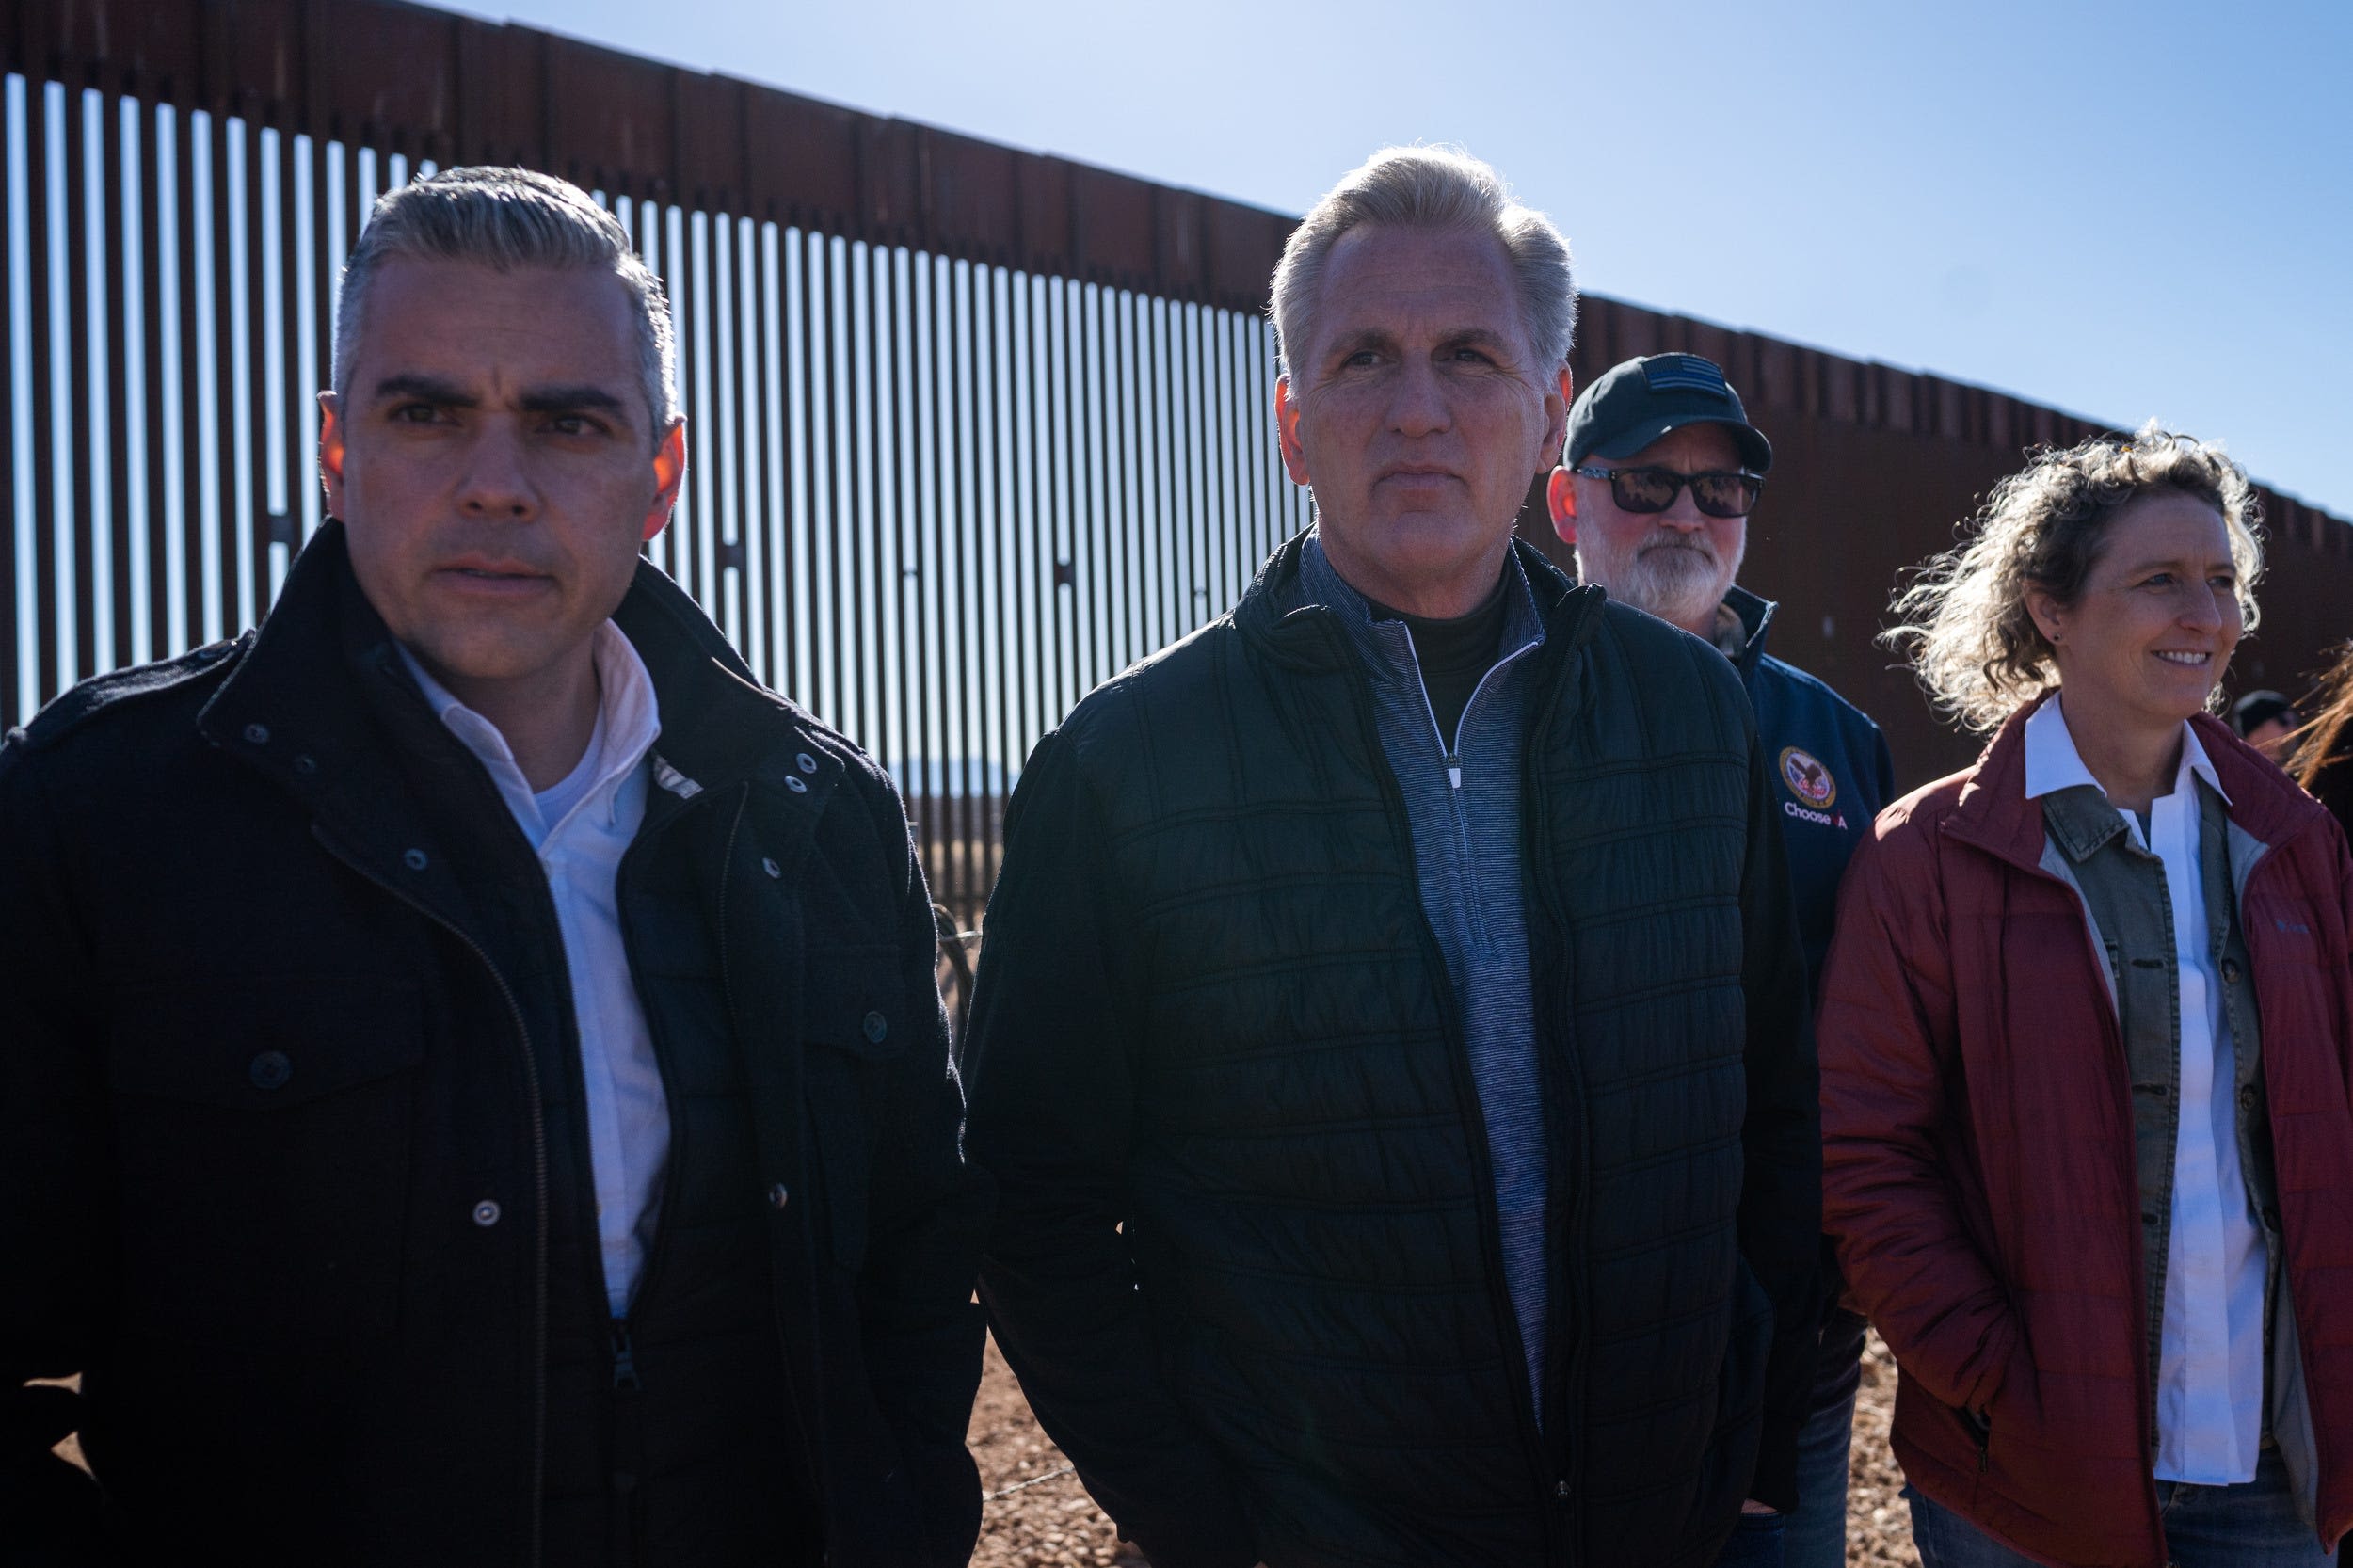 Republicans in Congress are full of BS if they reject a border security bill again